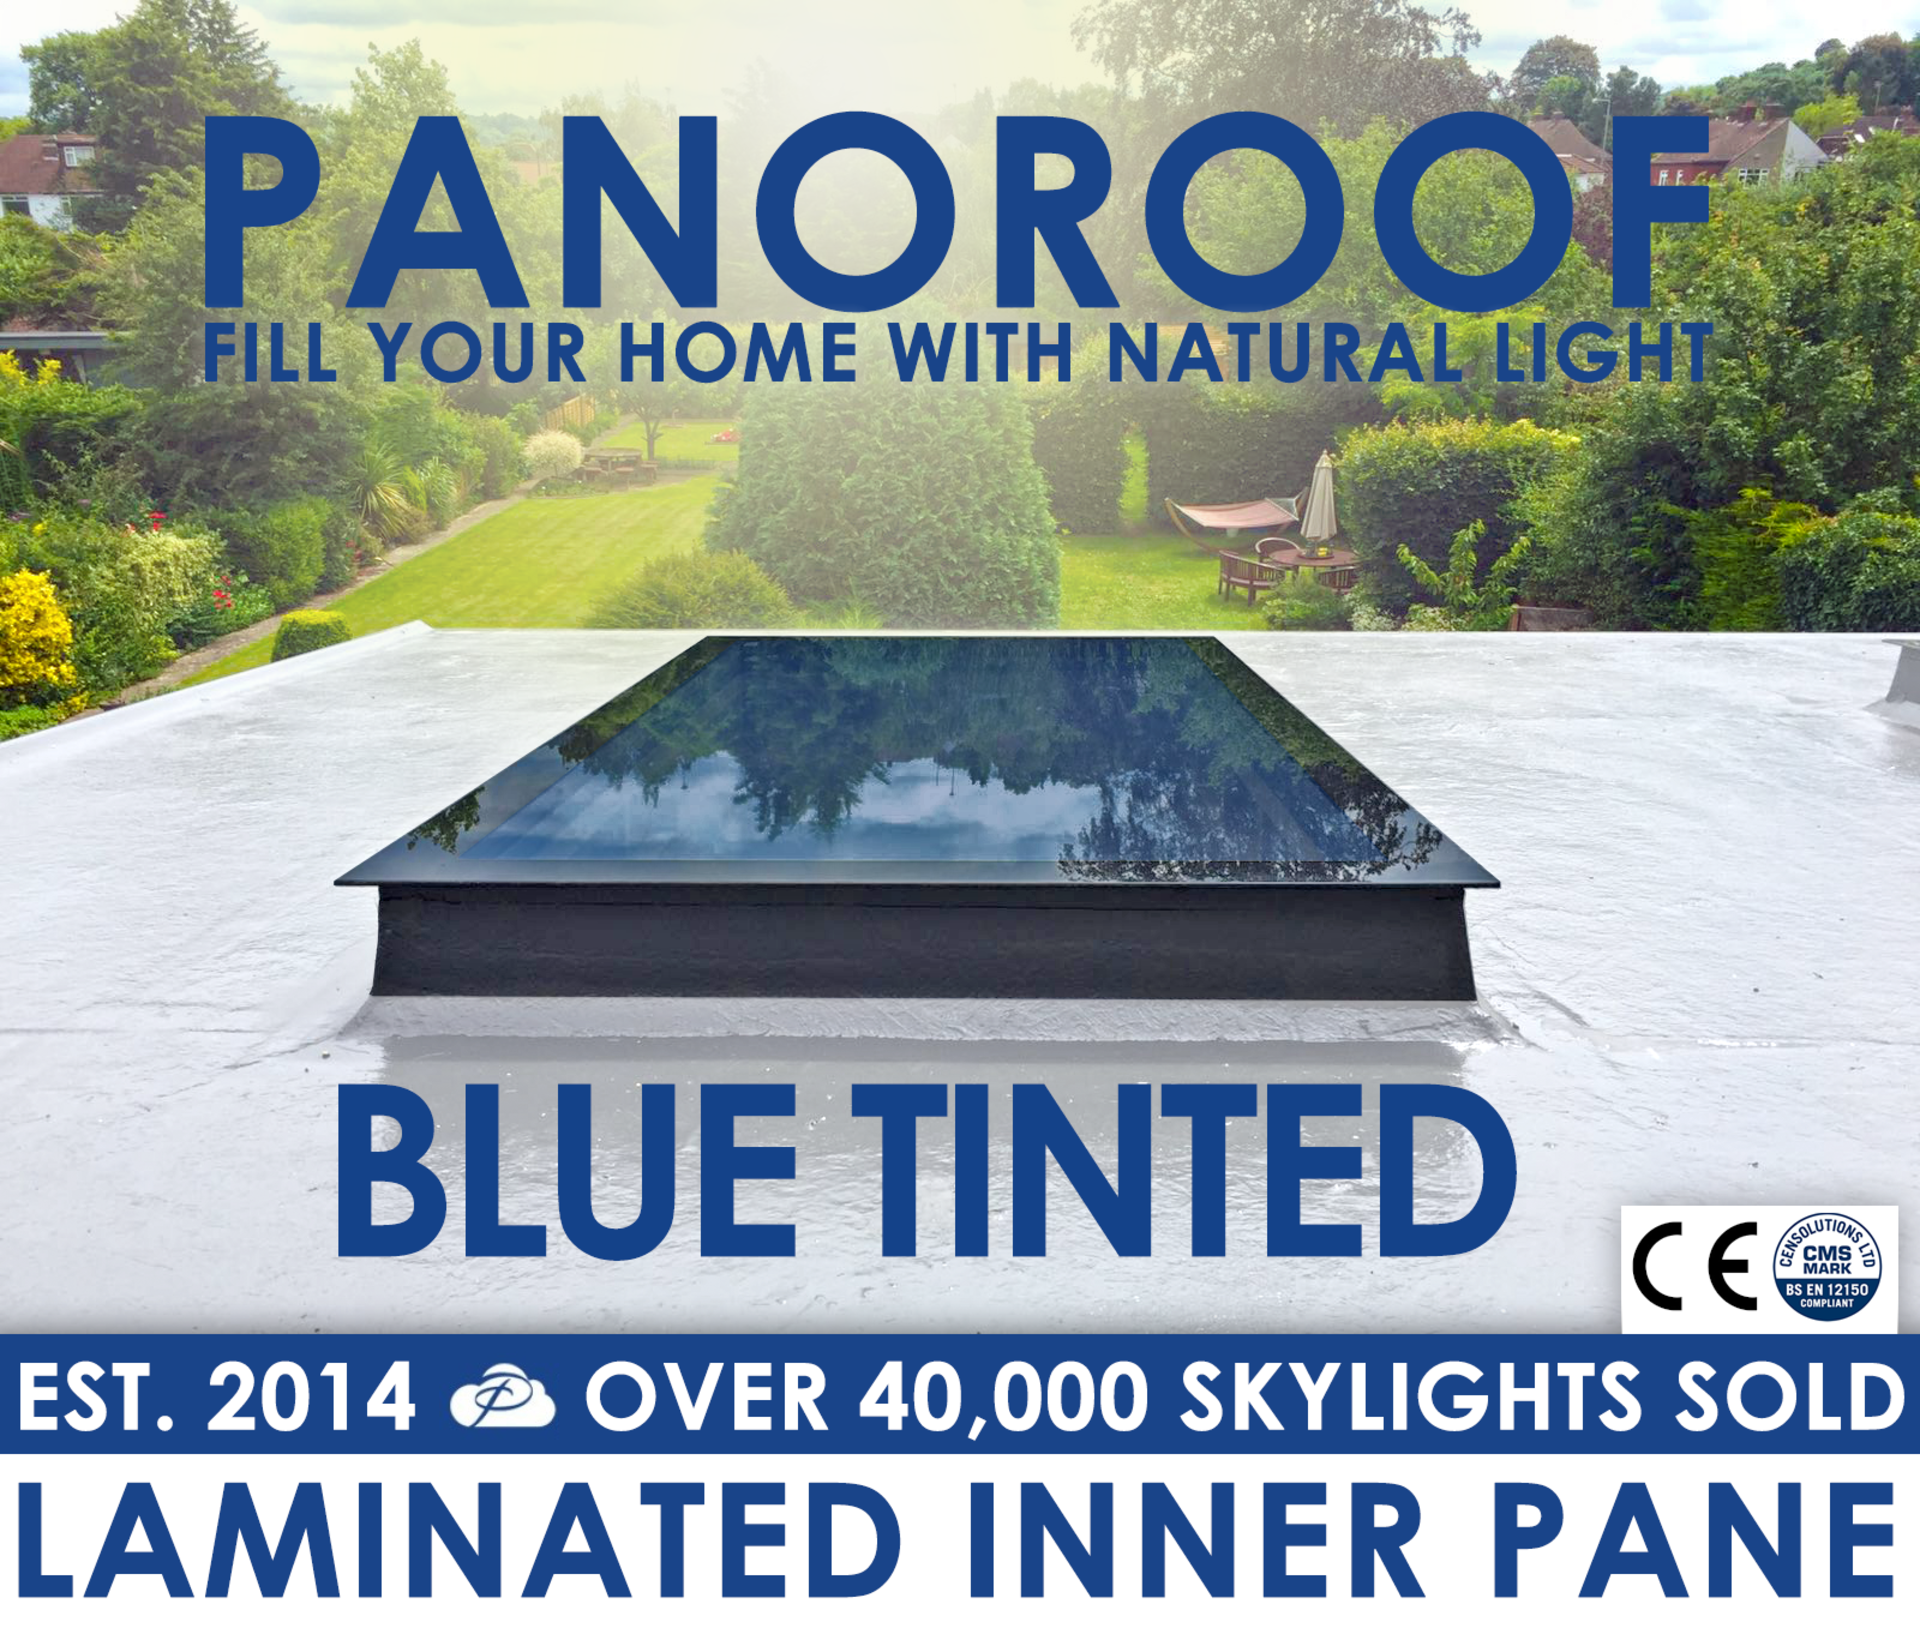 Panoroof 600x1800mm BLUE TINTED GLASS Triple Glazed Self Cleaning WITH 8.8mm LAMINATED INNER PANE (